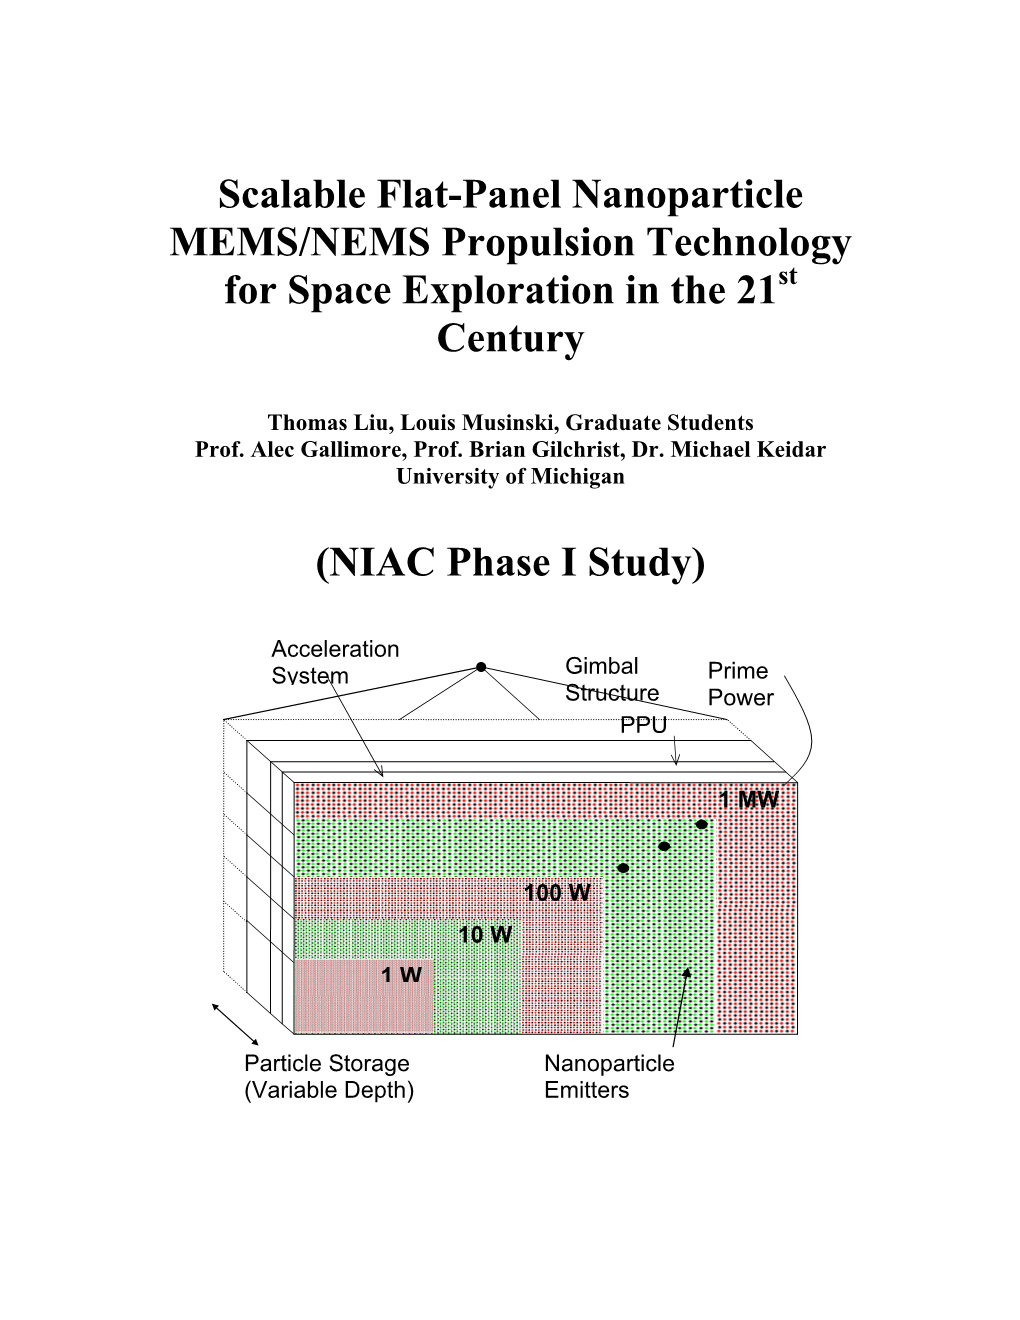 Scalable Flat-Panel Nanoparticle MEMS/NEMS Propulsion Technology for Space Exploration in the 21St Century